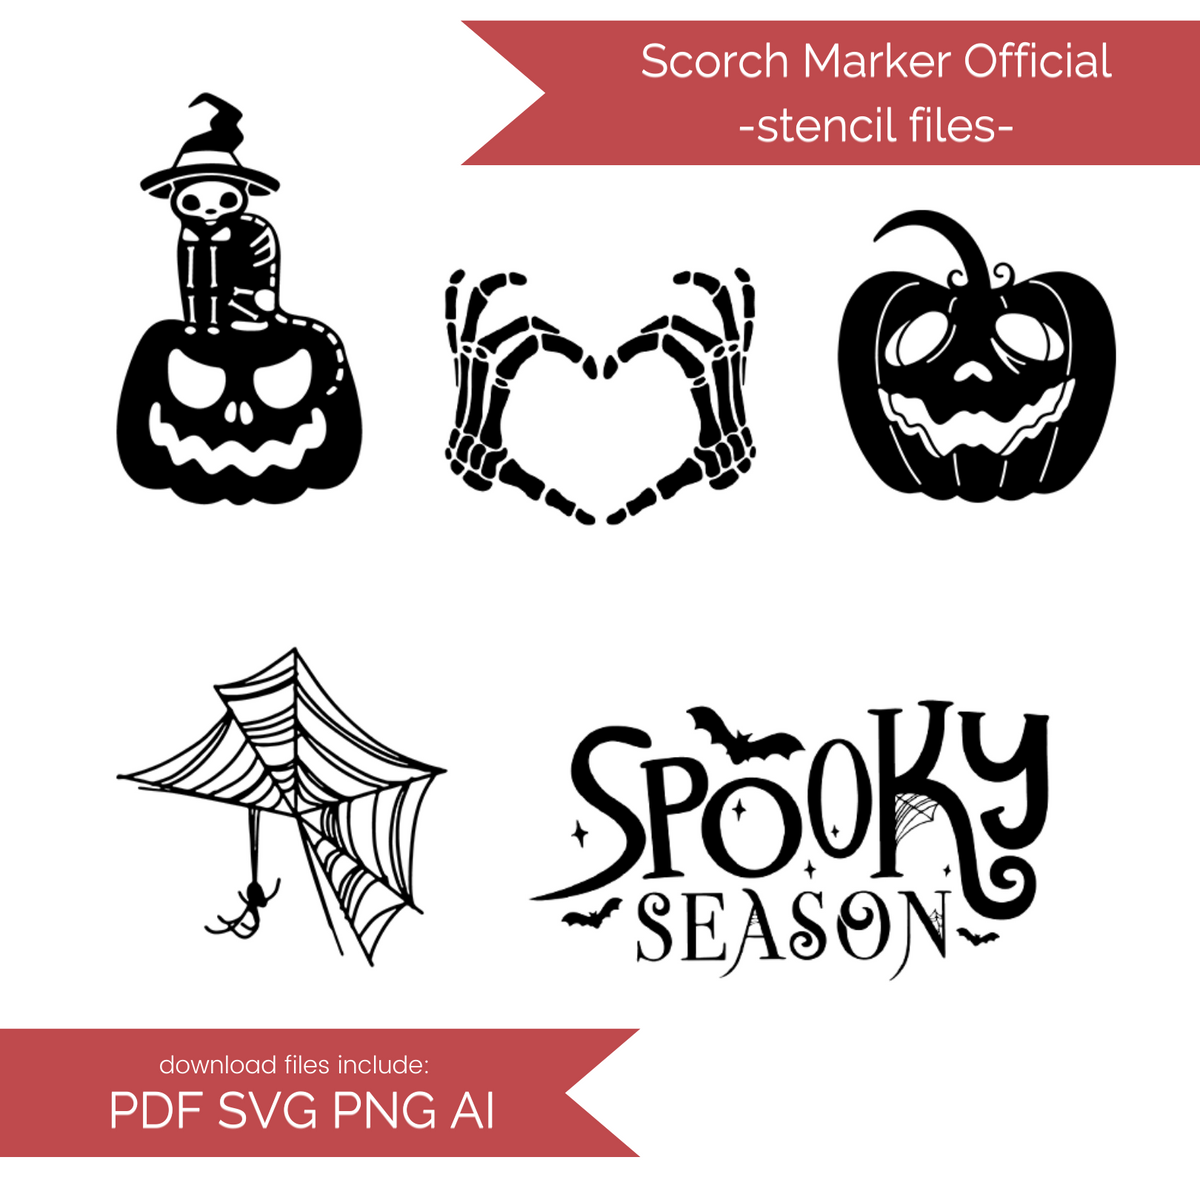 Halloween Stencil Files! 2020 [AI SVG PNG DXF]